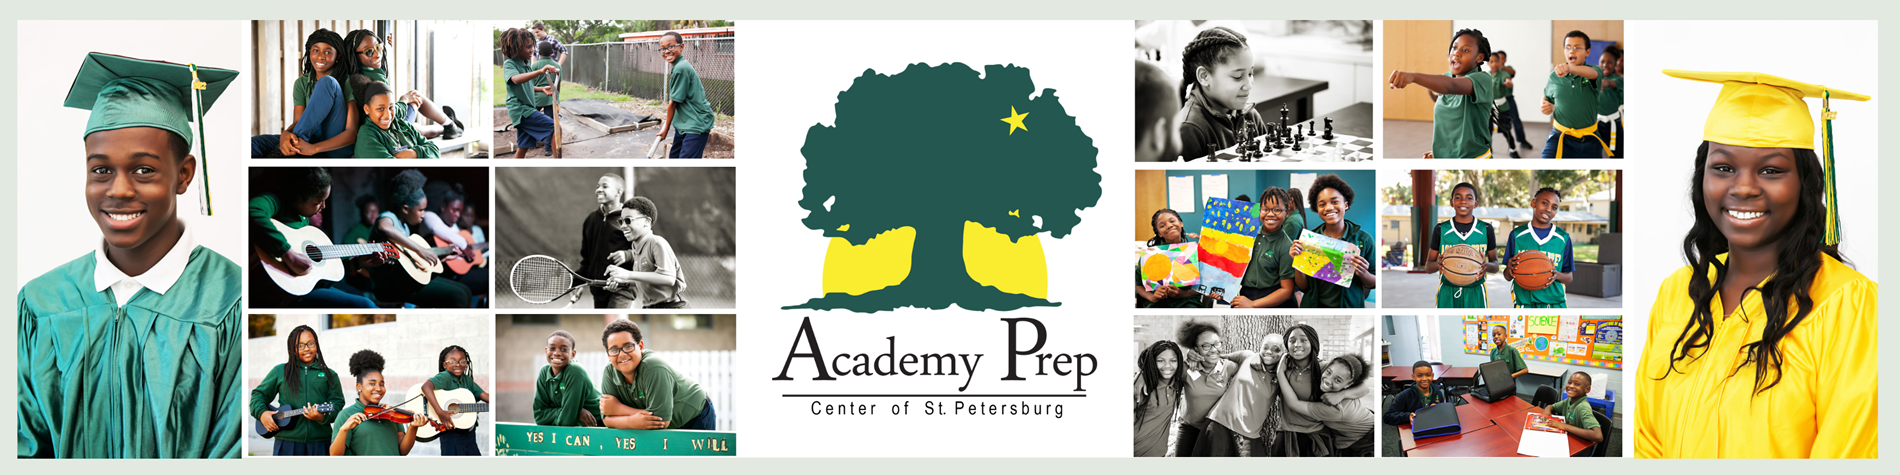 APSP Logo Banner with Pictures  